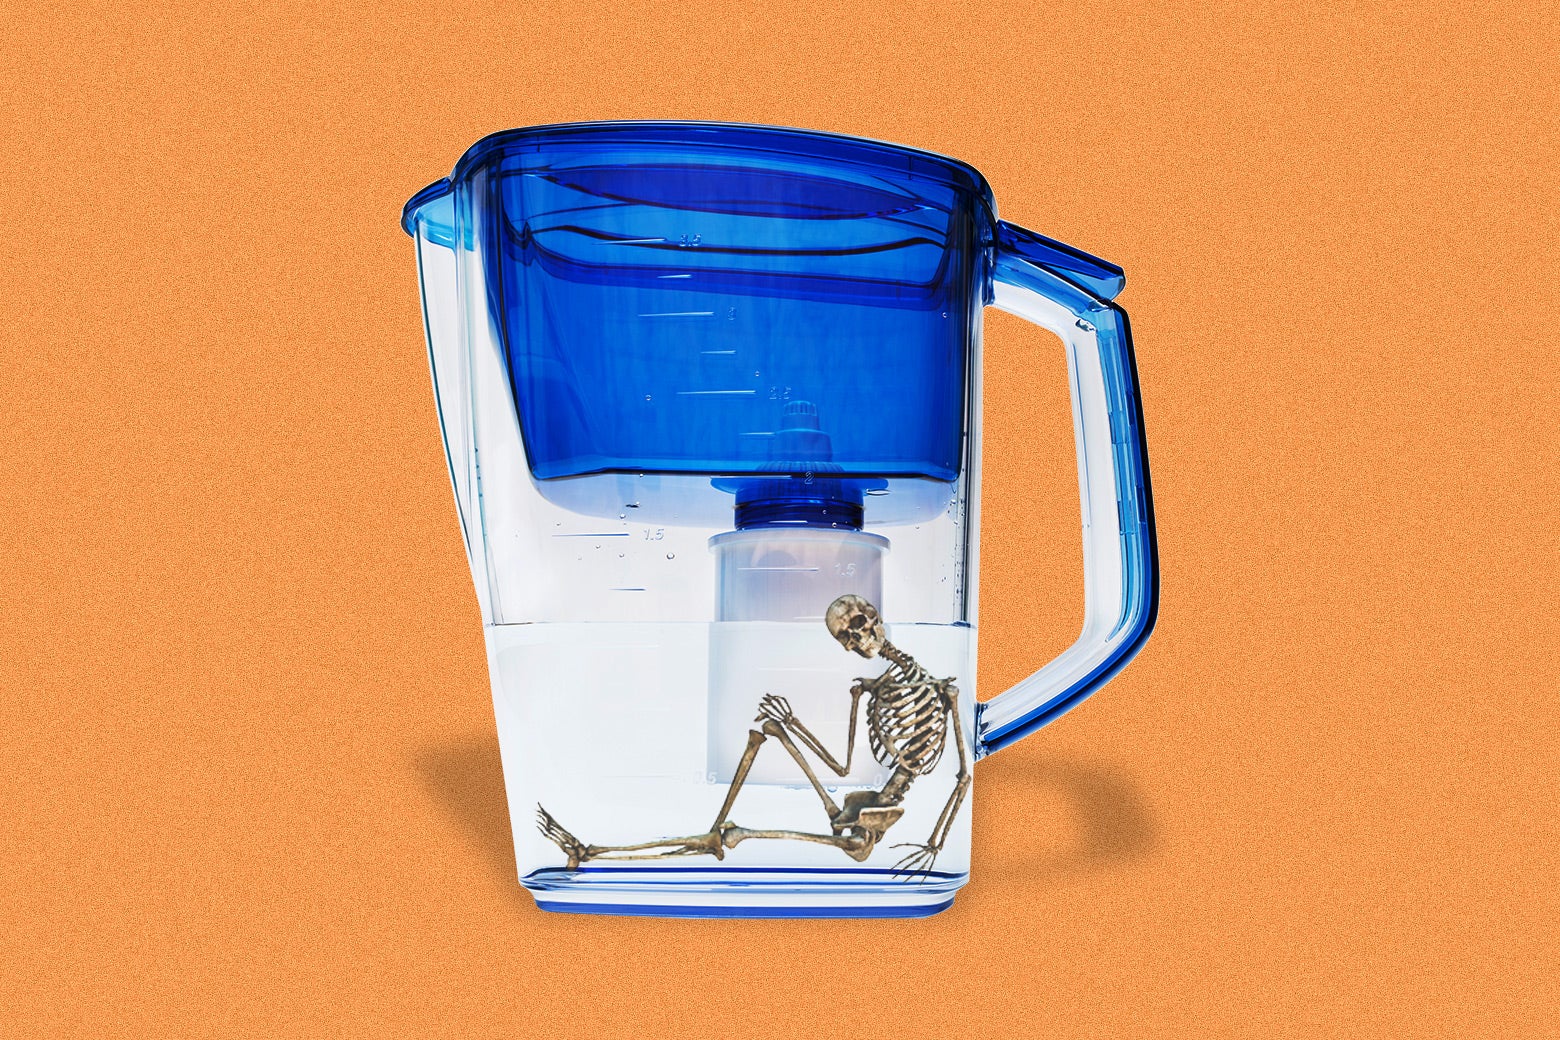 A skeleton seated and relaxed at the bottom of a Brita-style pitcher.